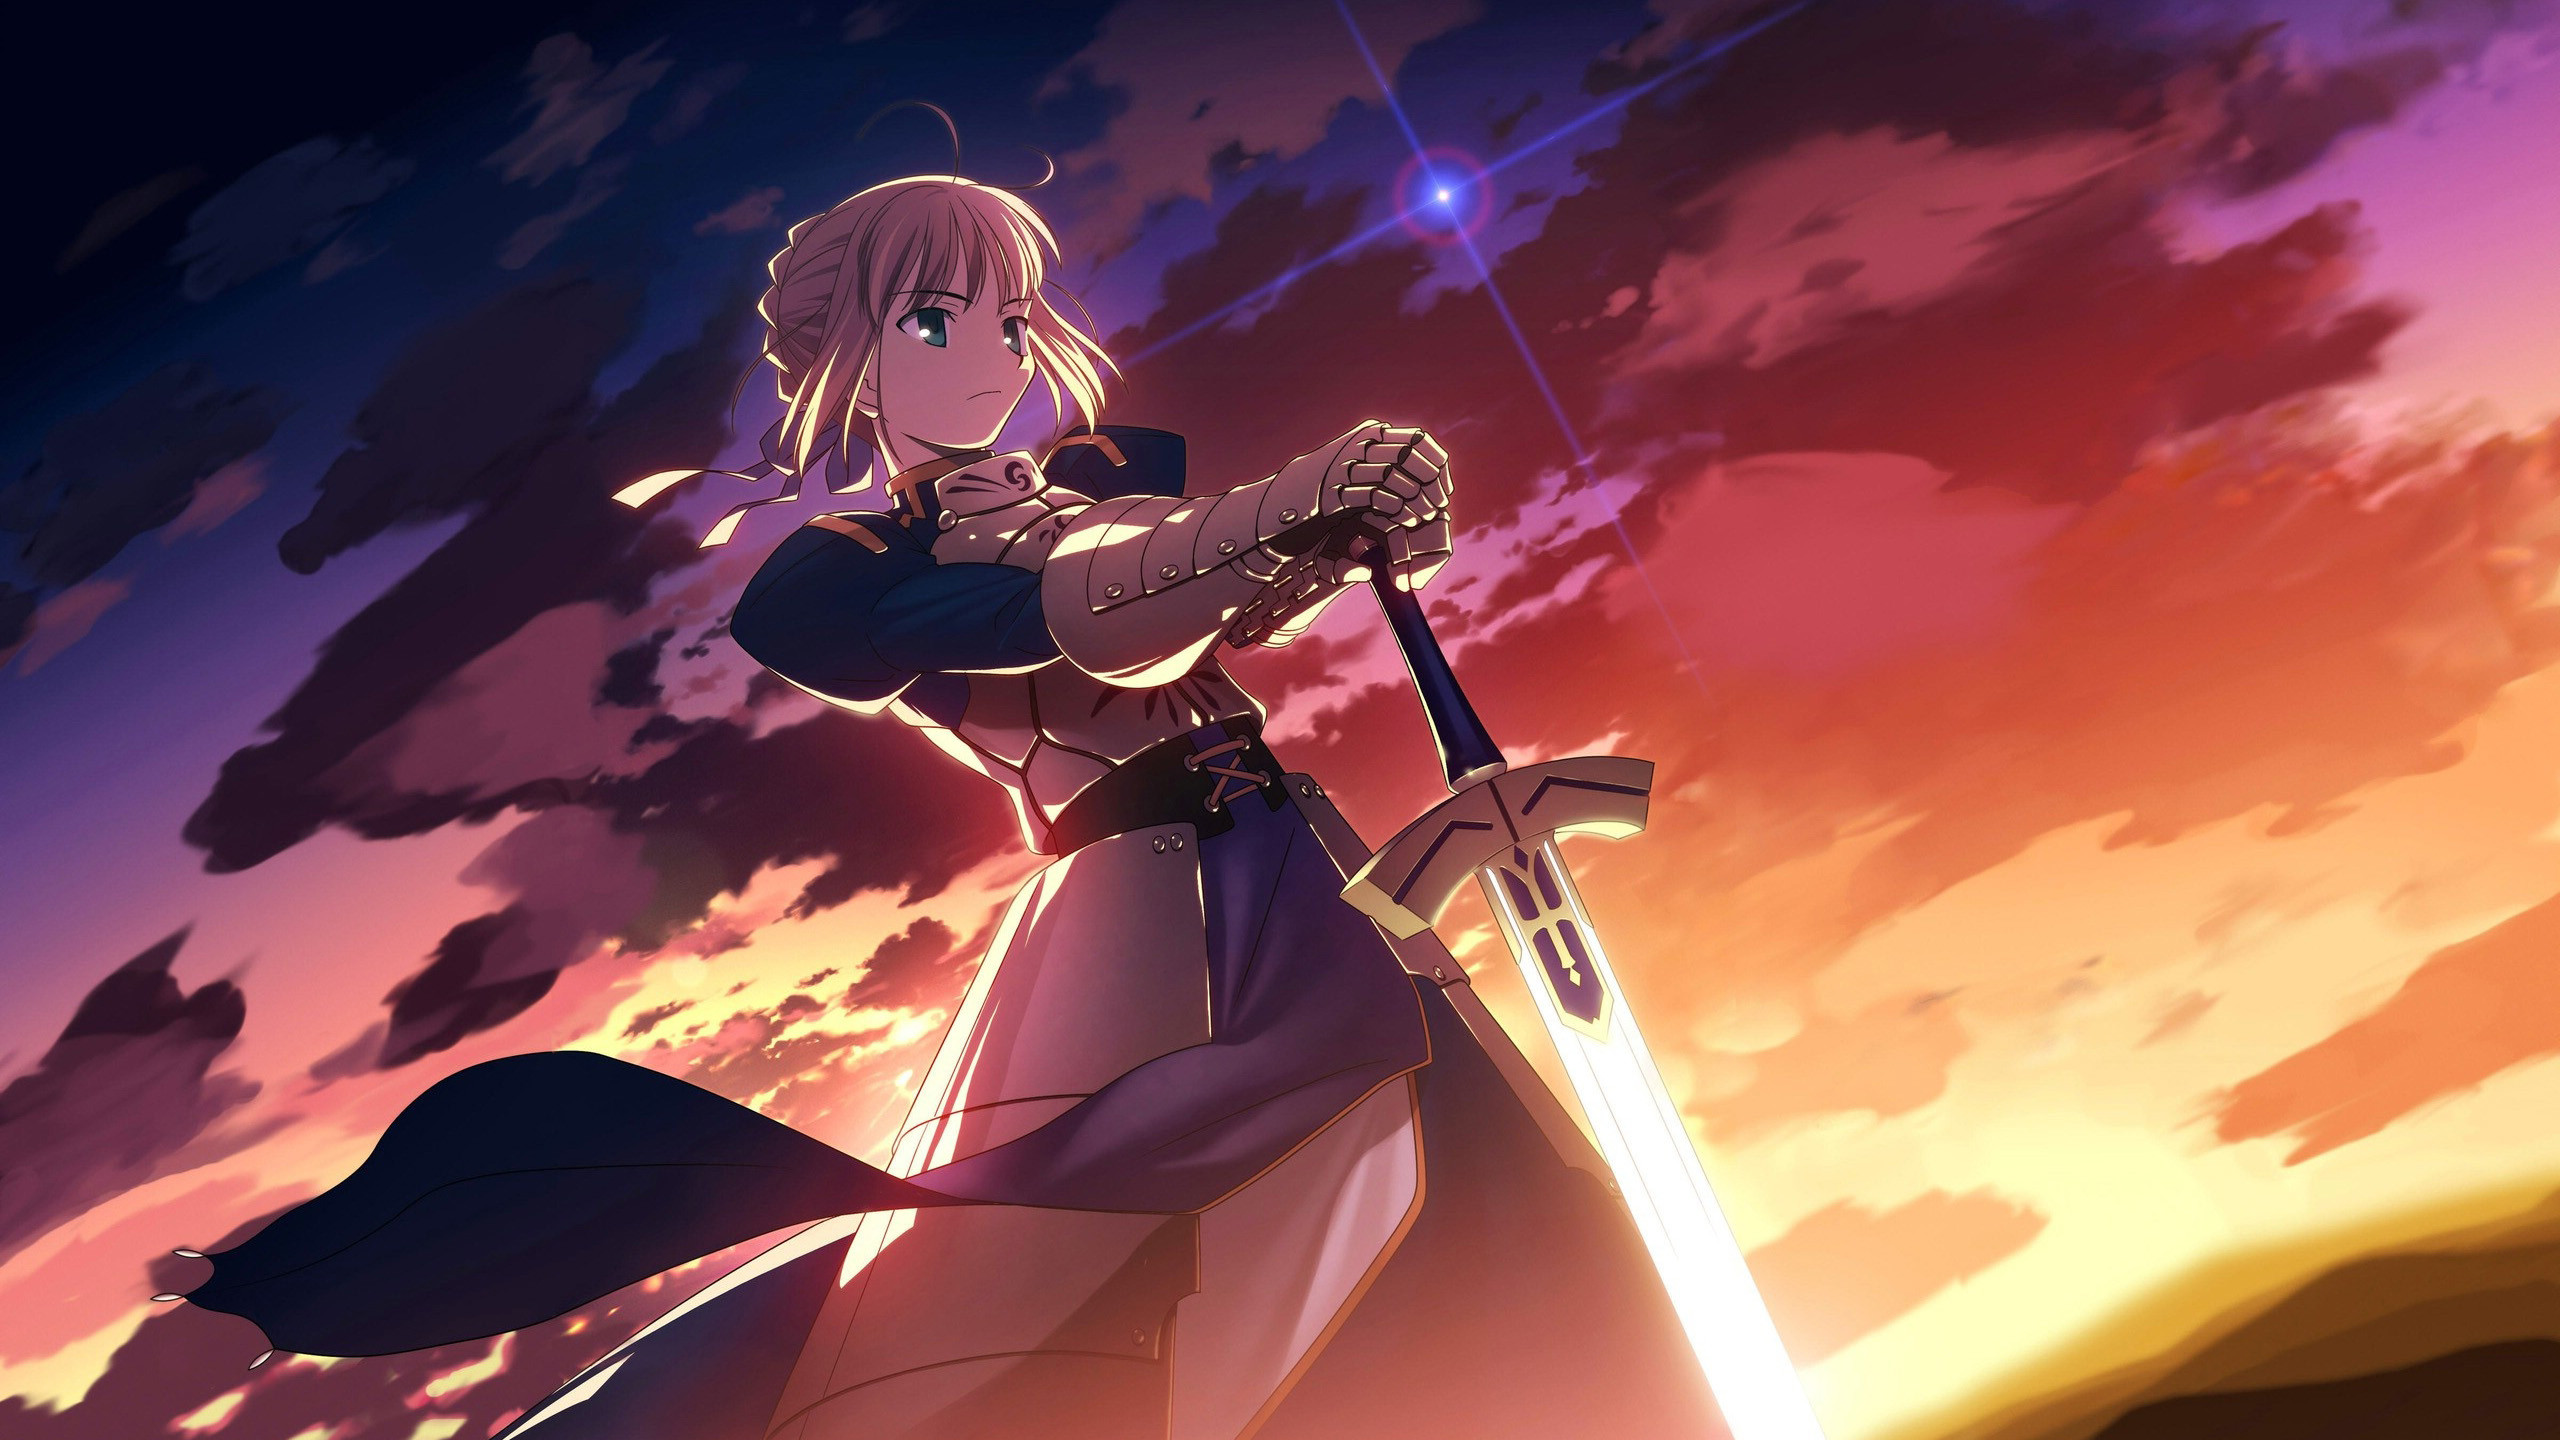 2560x1440 fate stay night rider | Fate-Stay Night Wallpaper -Rider- | Fate |  Pinterest | Fate stay night, Wallpaper and Anime